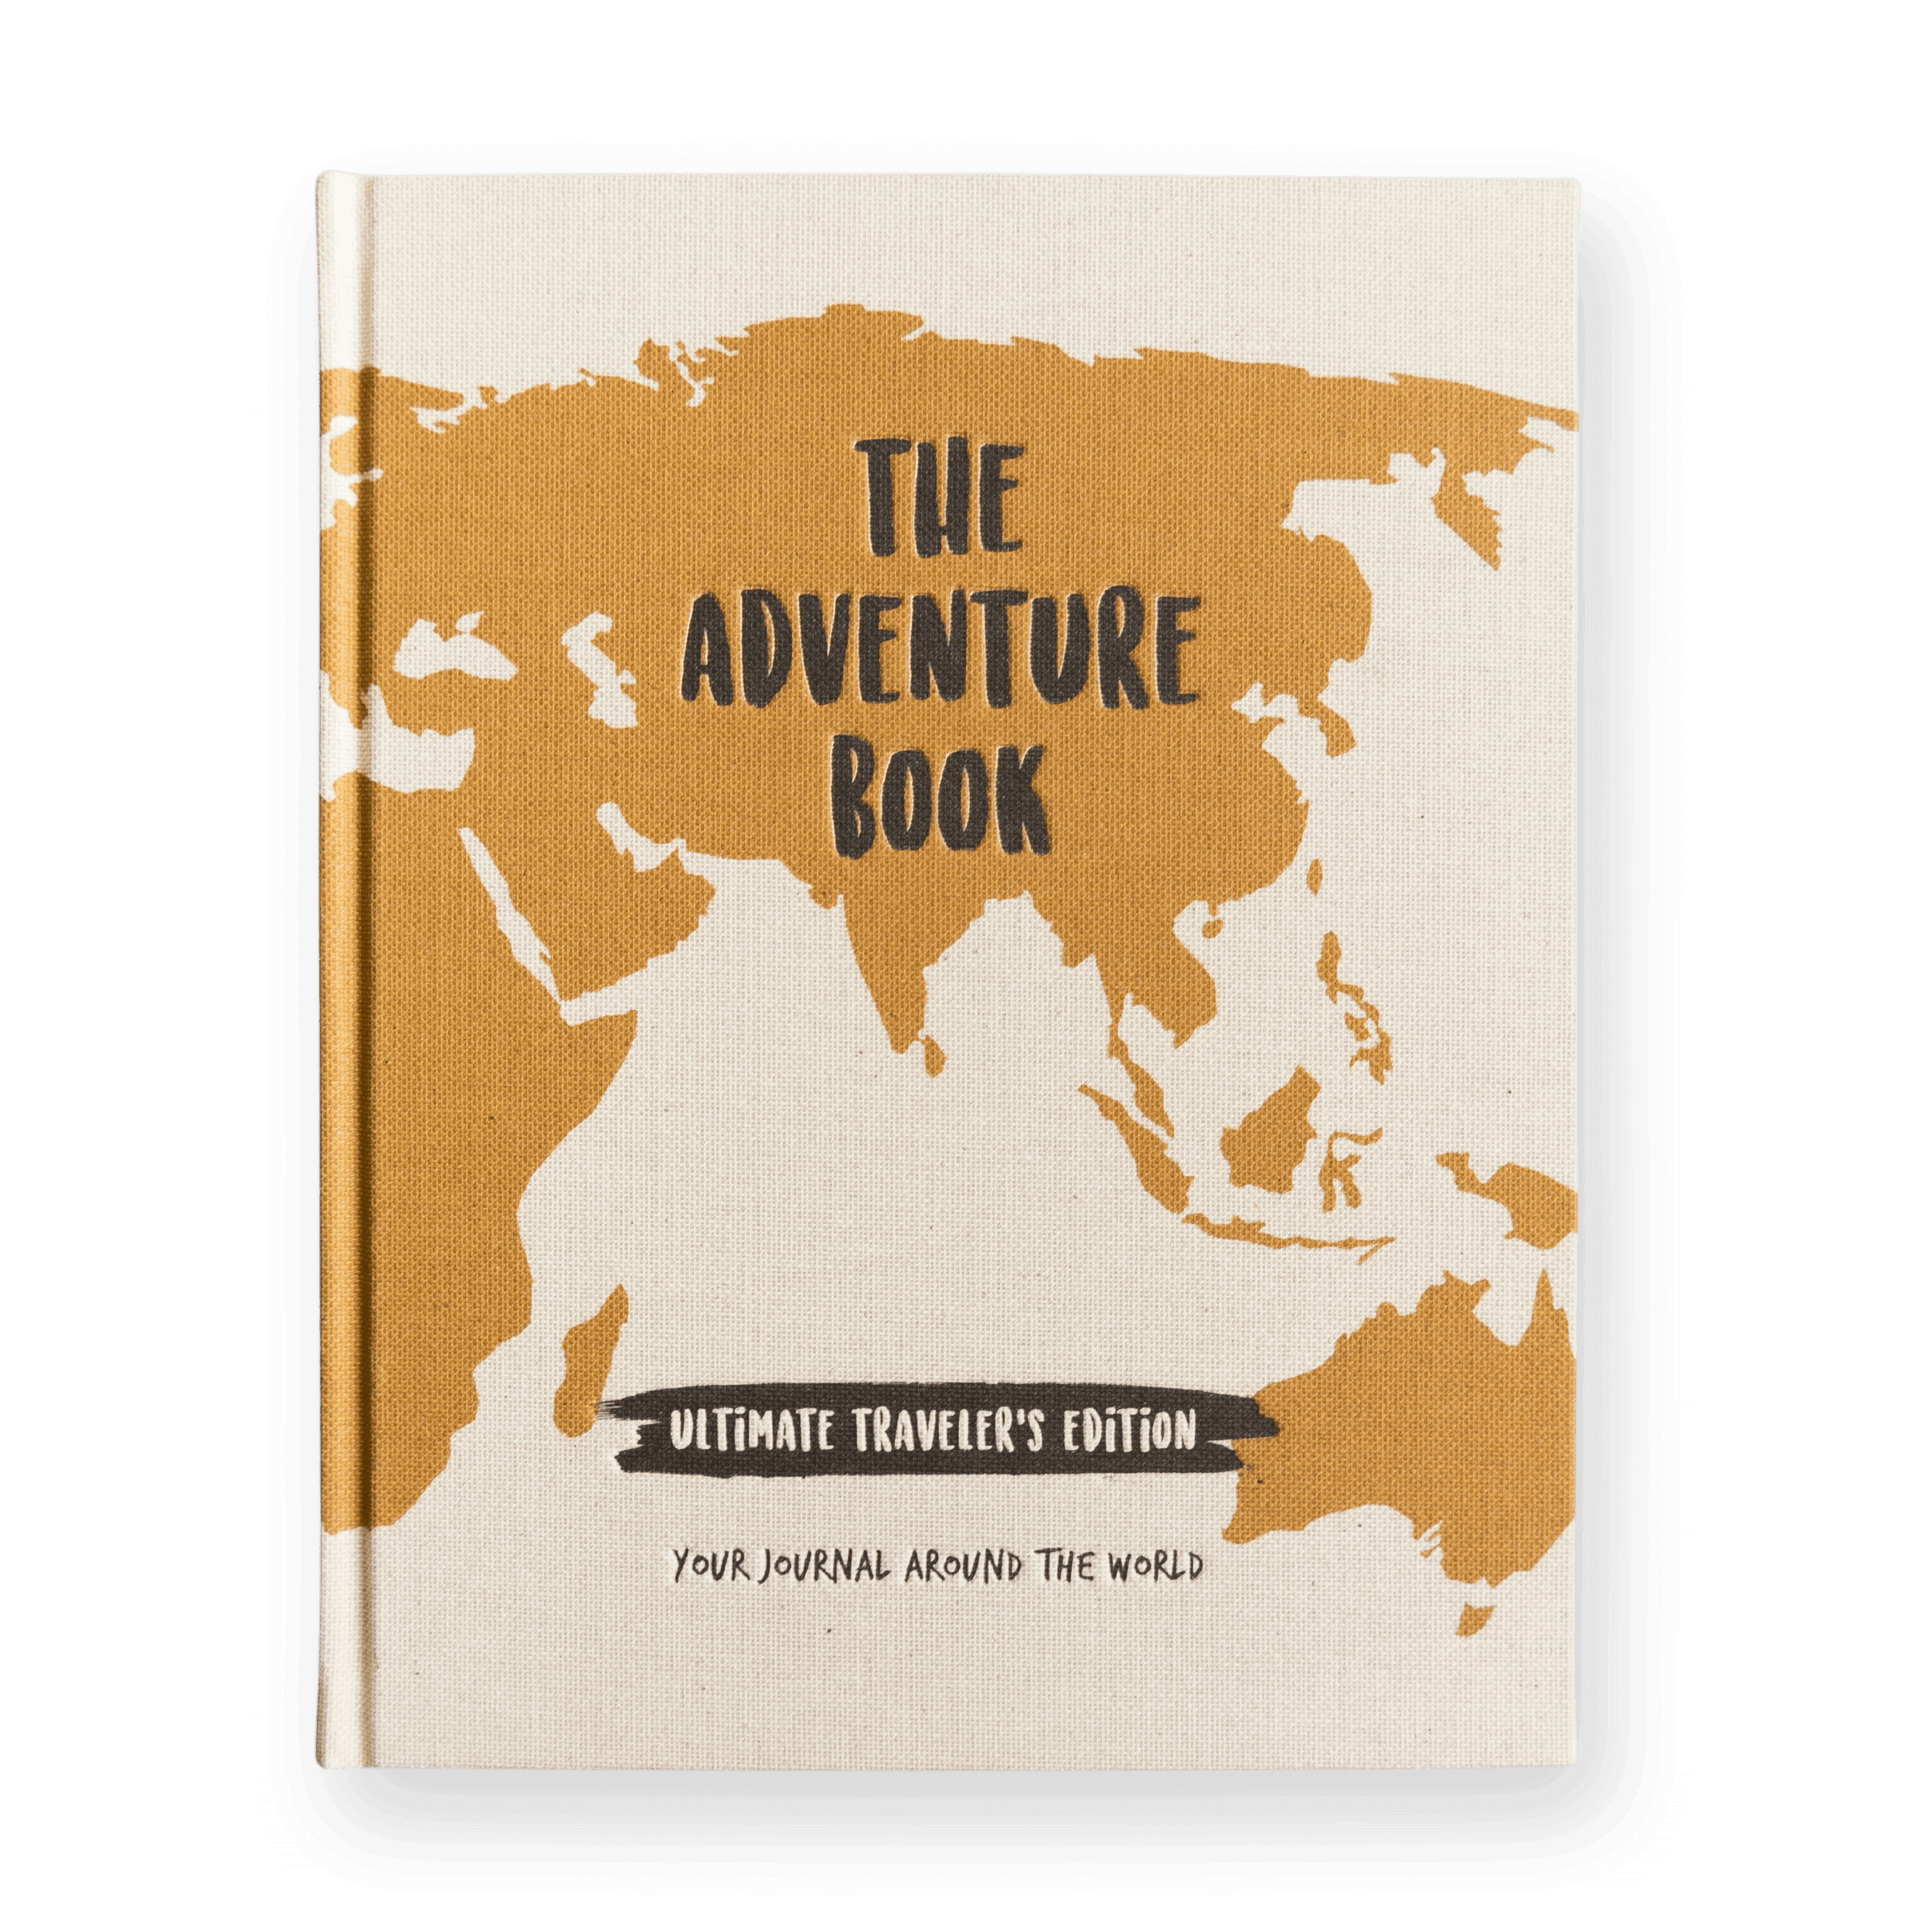 The Adventure Book Ultimate Traveler's Edition